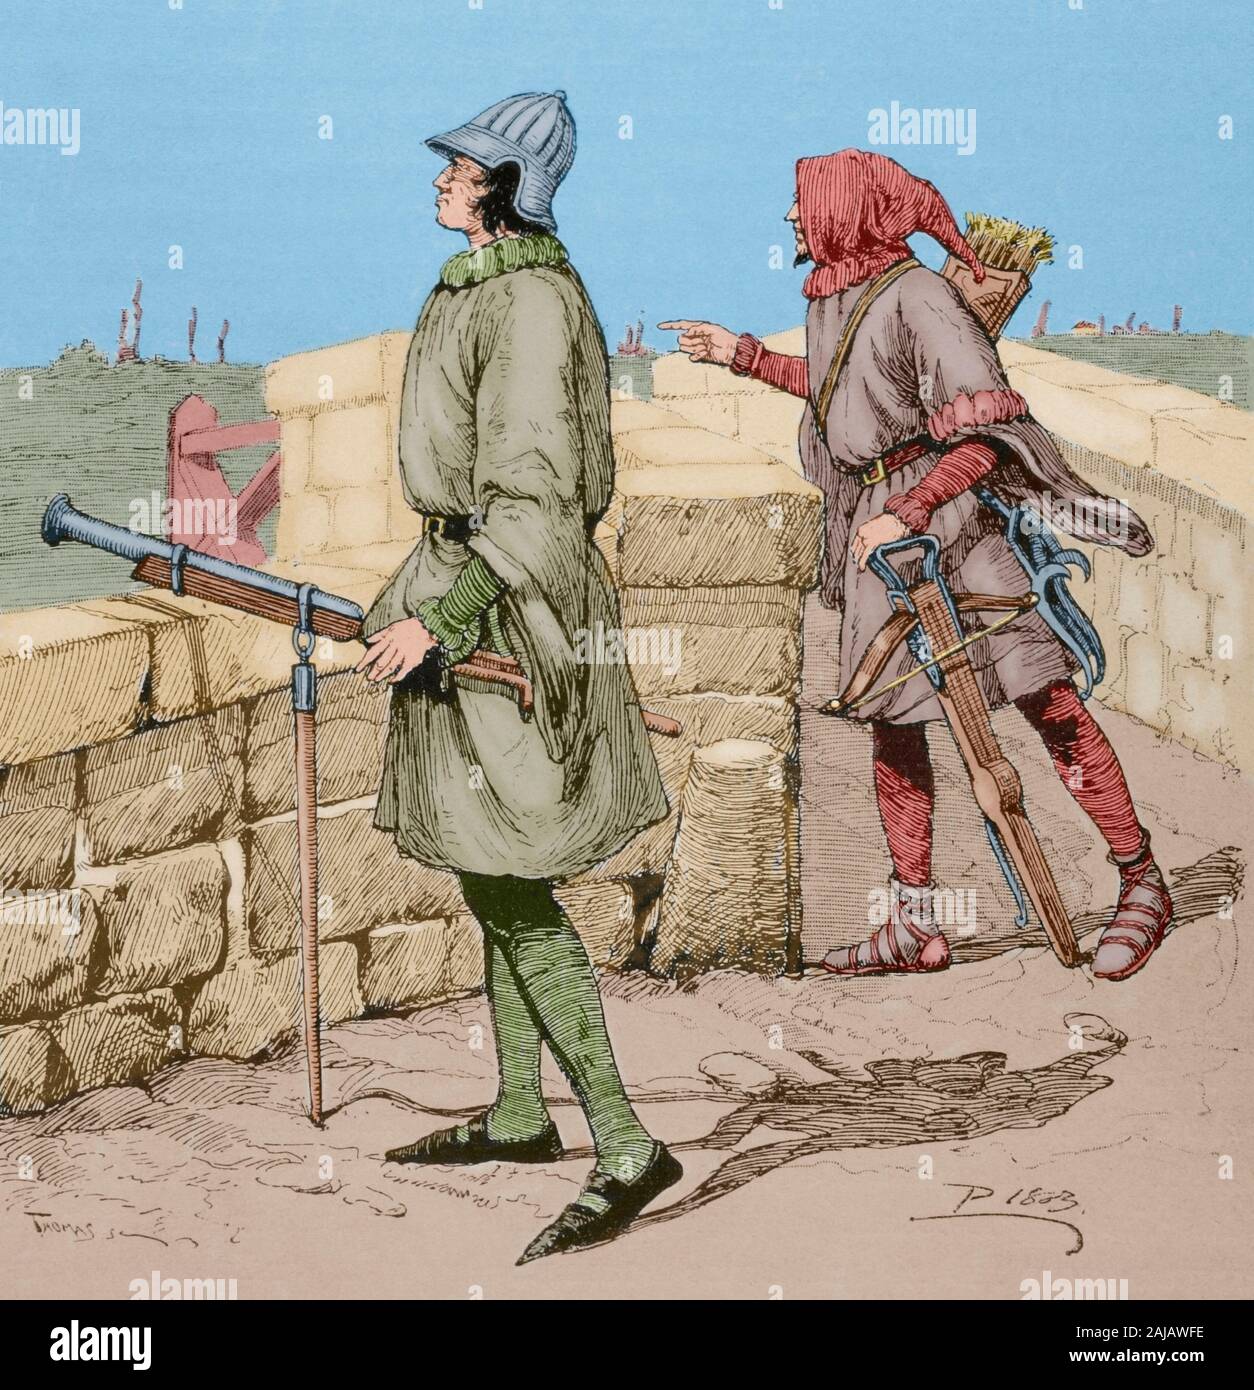 Soldiers of 'Acostamientos'. The Acostamiento was a salary granted by the king to his vassals under which they were obliged to serve him in war. Culveriner (left). Crossbowman (right). Engraving. Museo Militar, 1883. Later colouration. Stock Photo